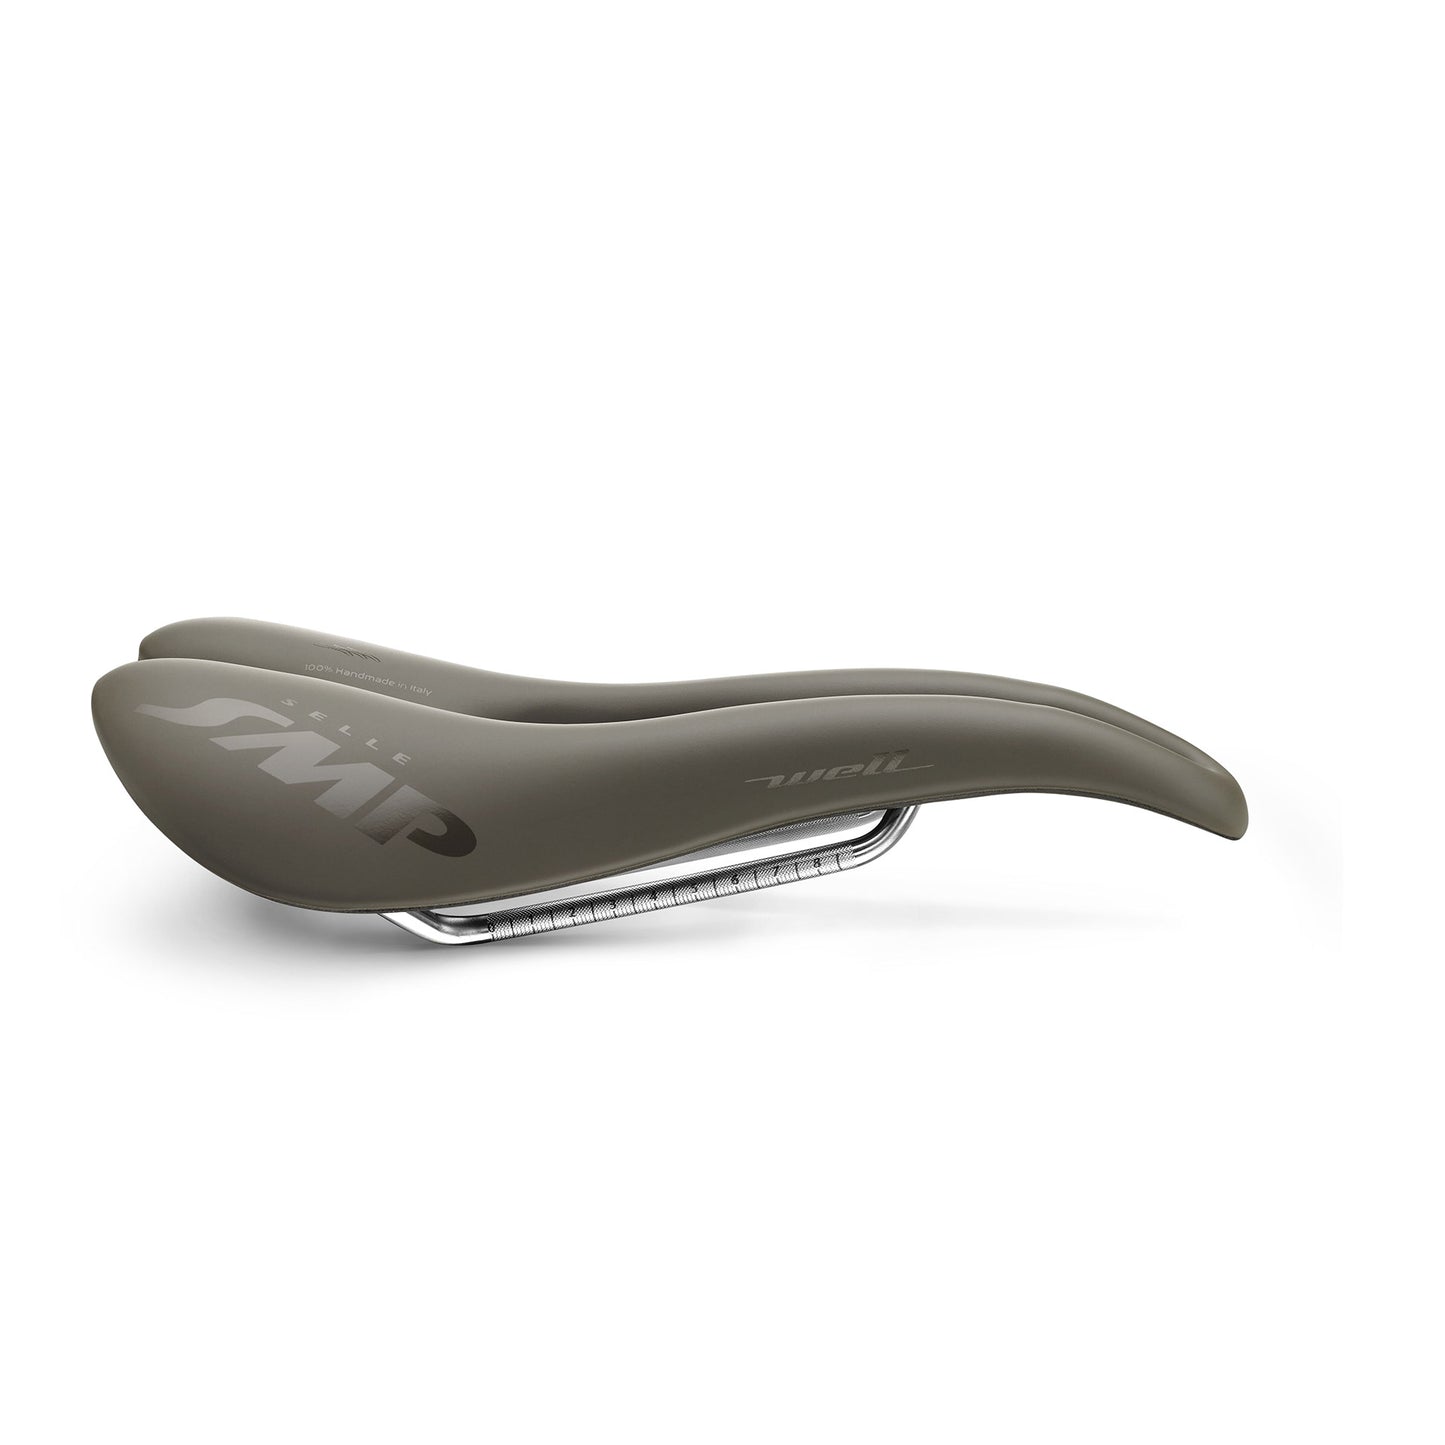 Selle SMP Saddle Tour Well Gravel Edition